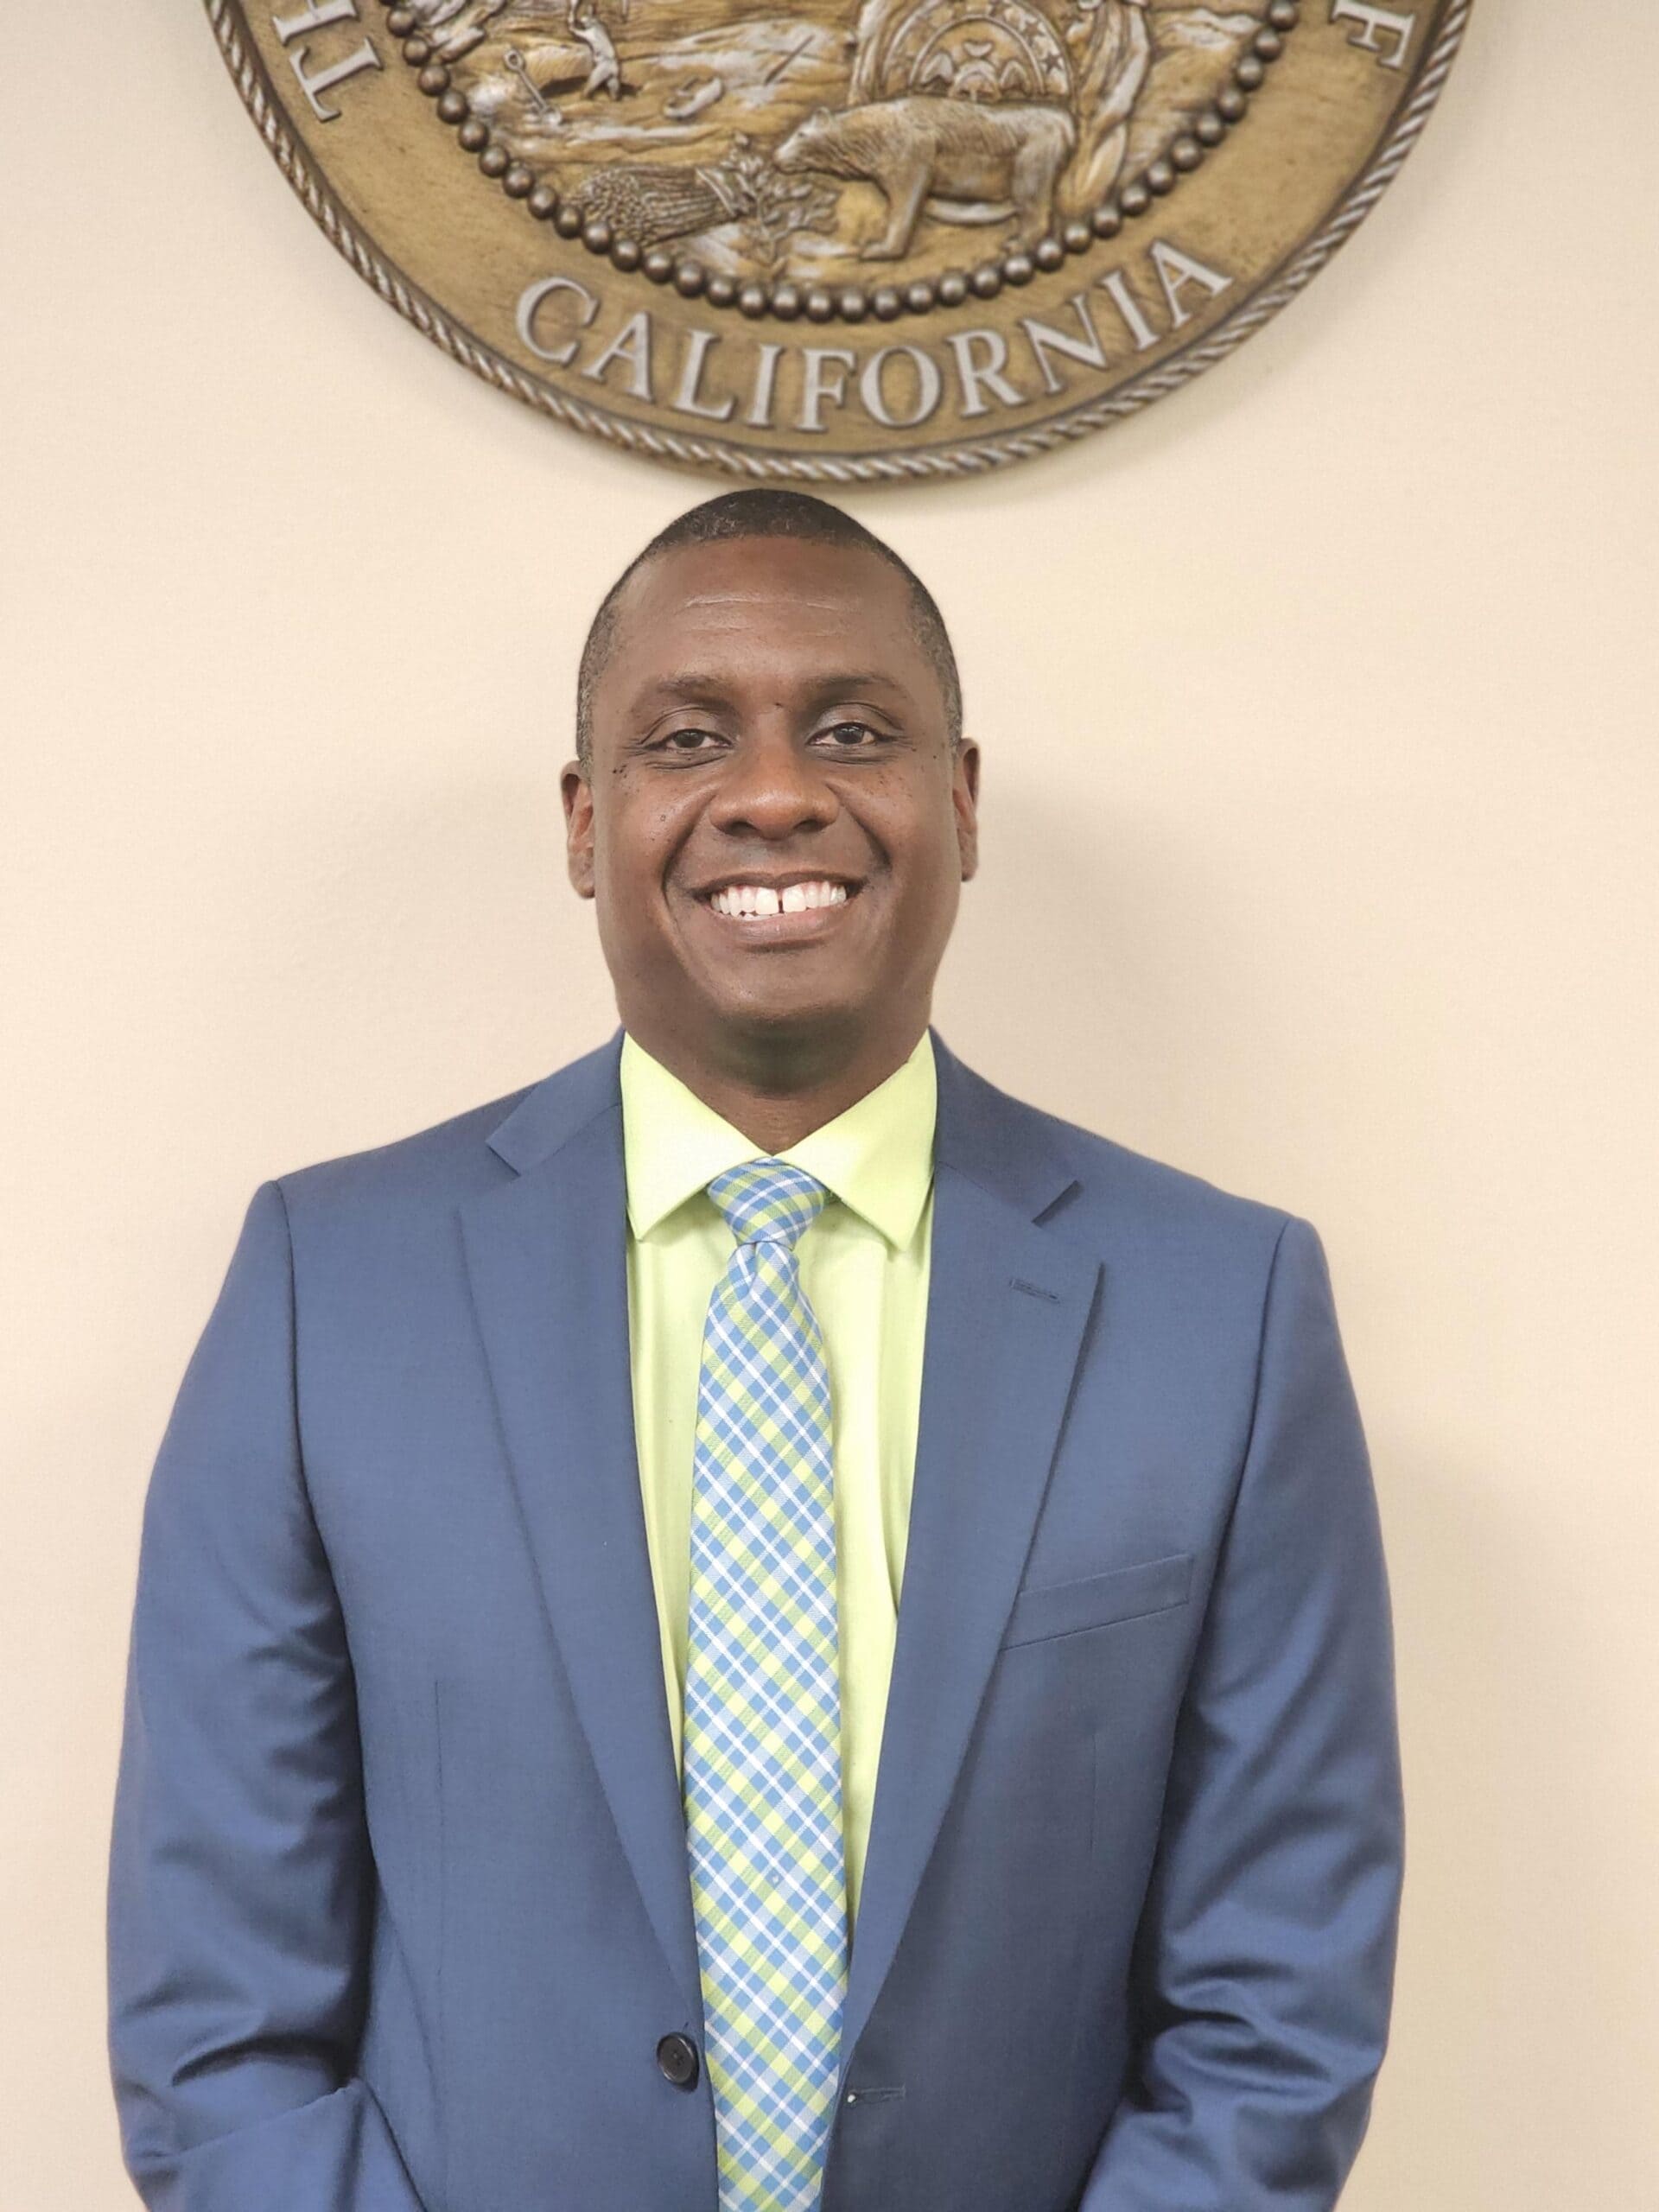 Riverside commissioner appointed to judgeship